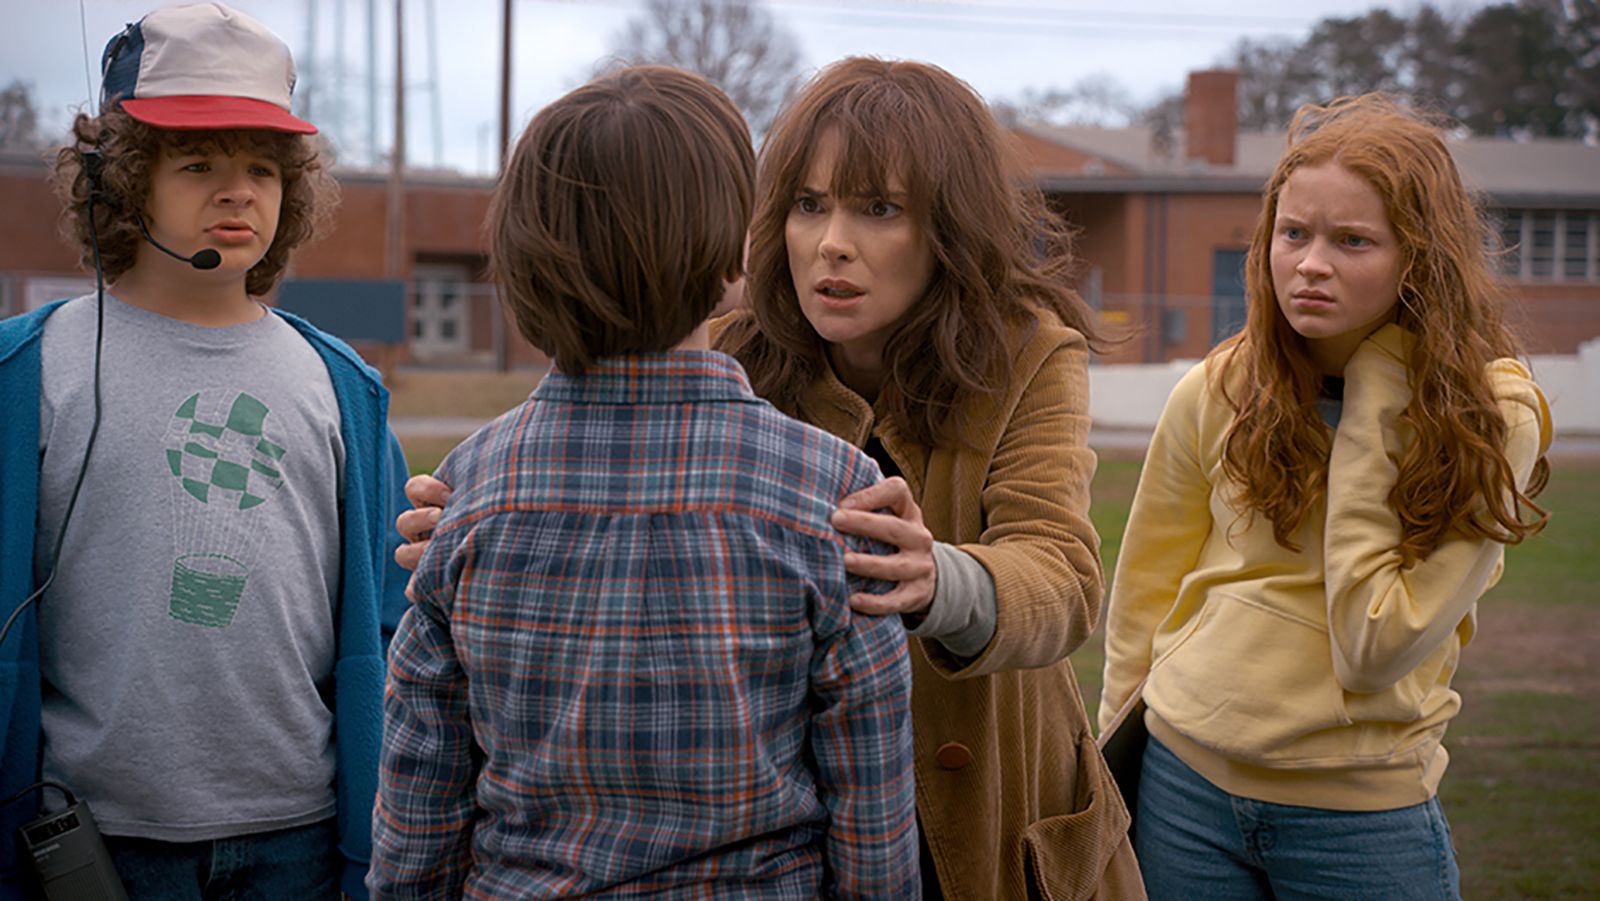 Stranger Things': Will There Be a Season 3? Here's What We Know